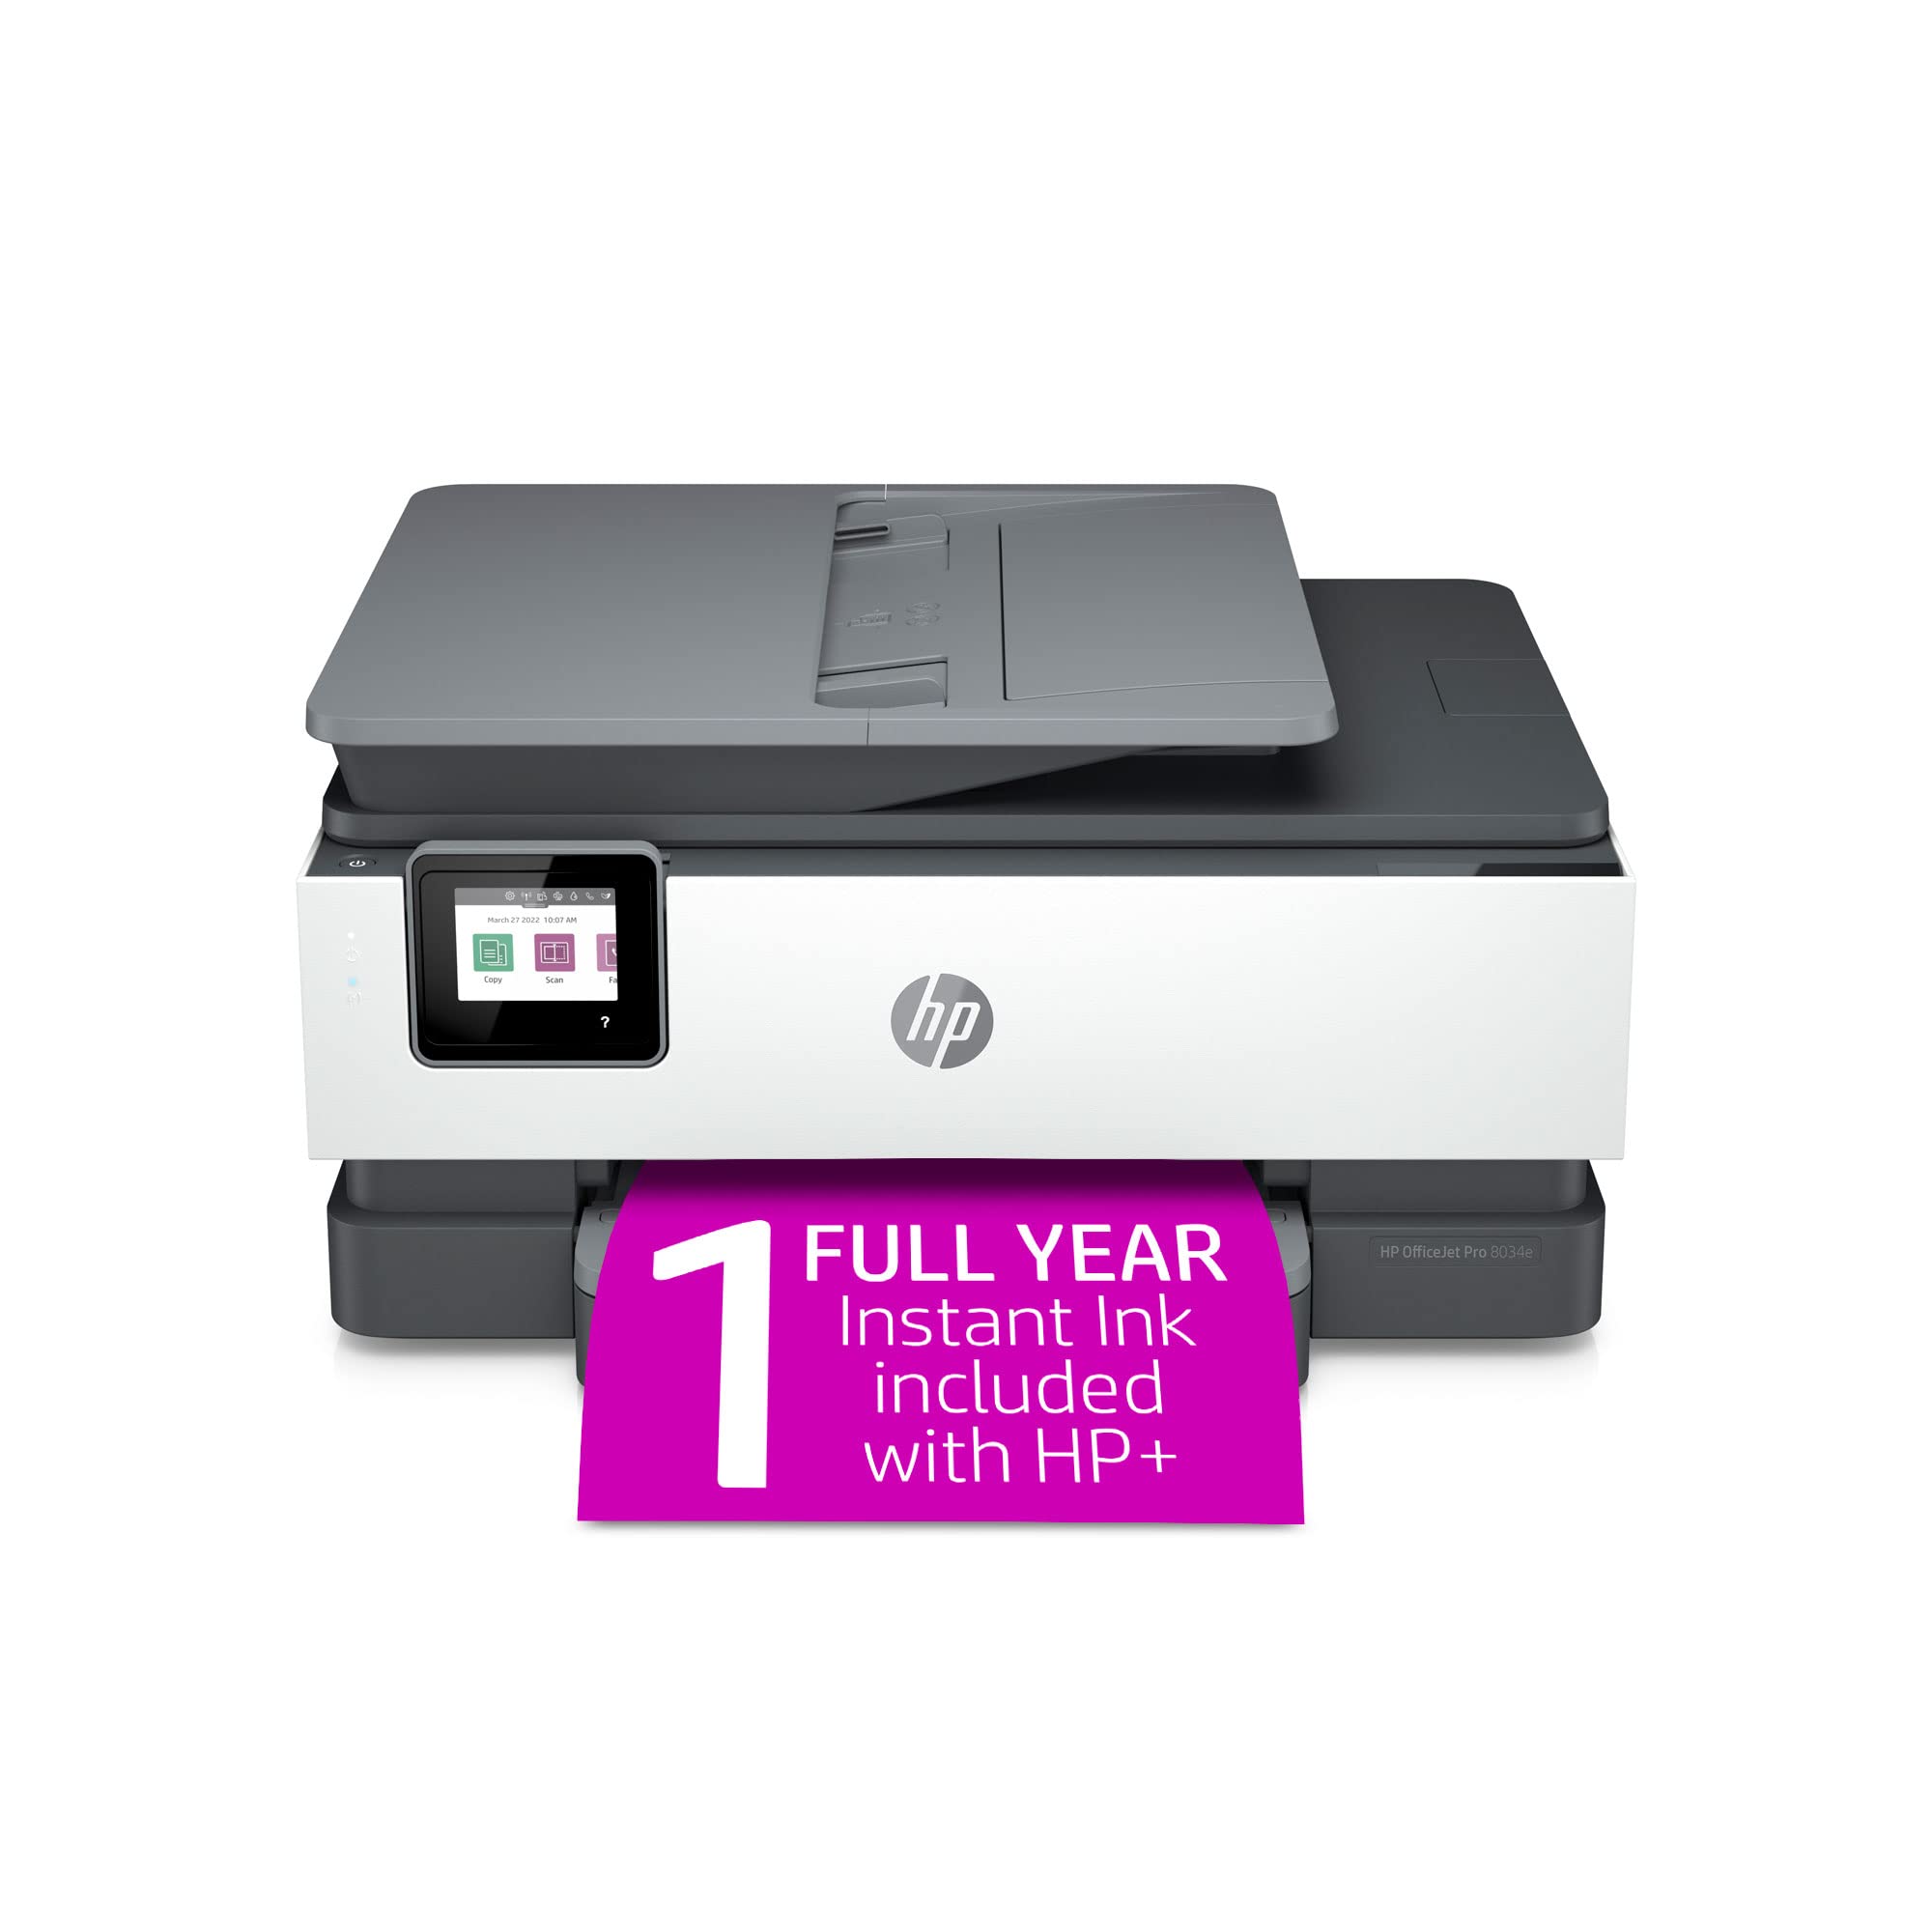 HP OfficeJet Pro 8034e Wireless Color All-in-One Printer with 1 Full Year Instant Ink